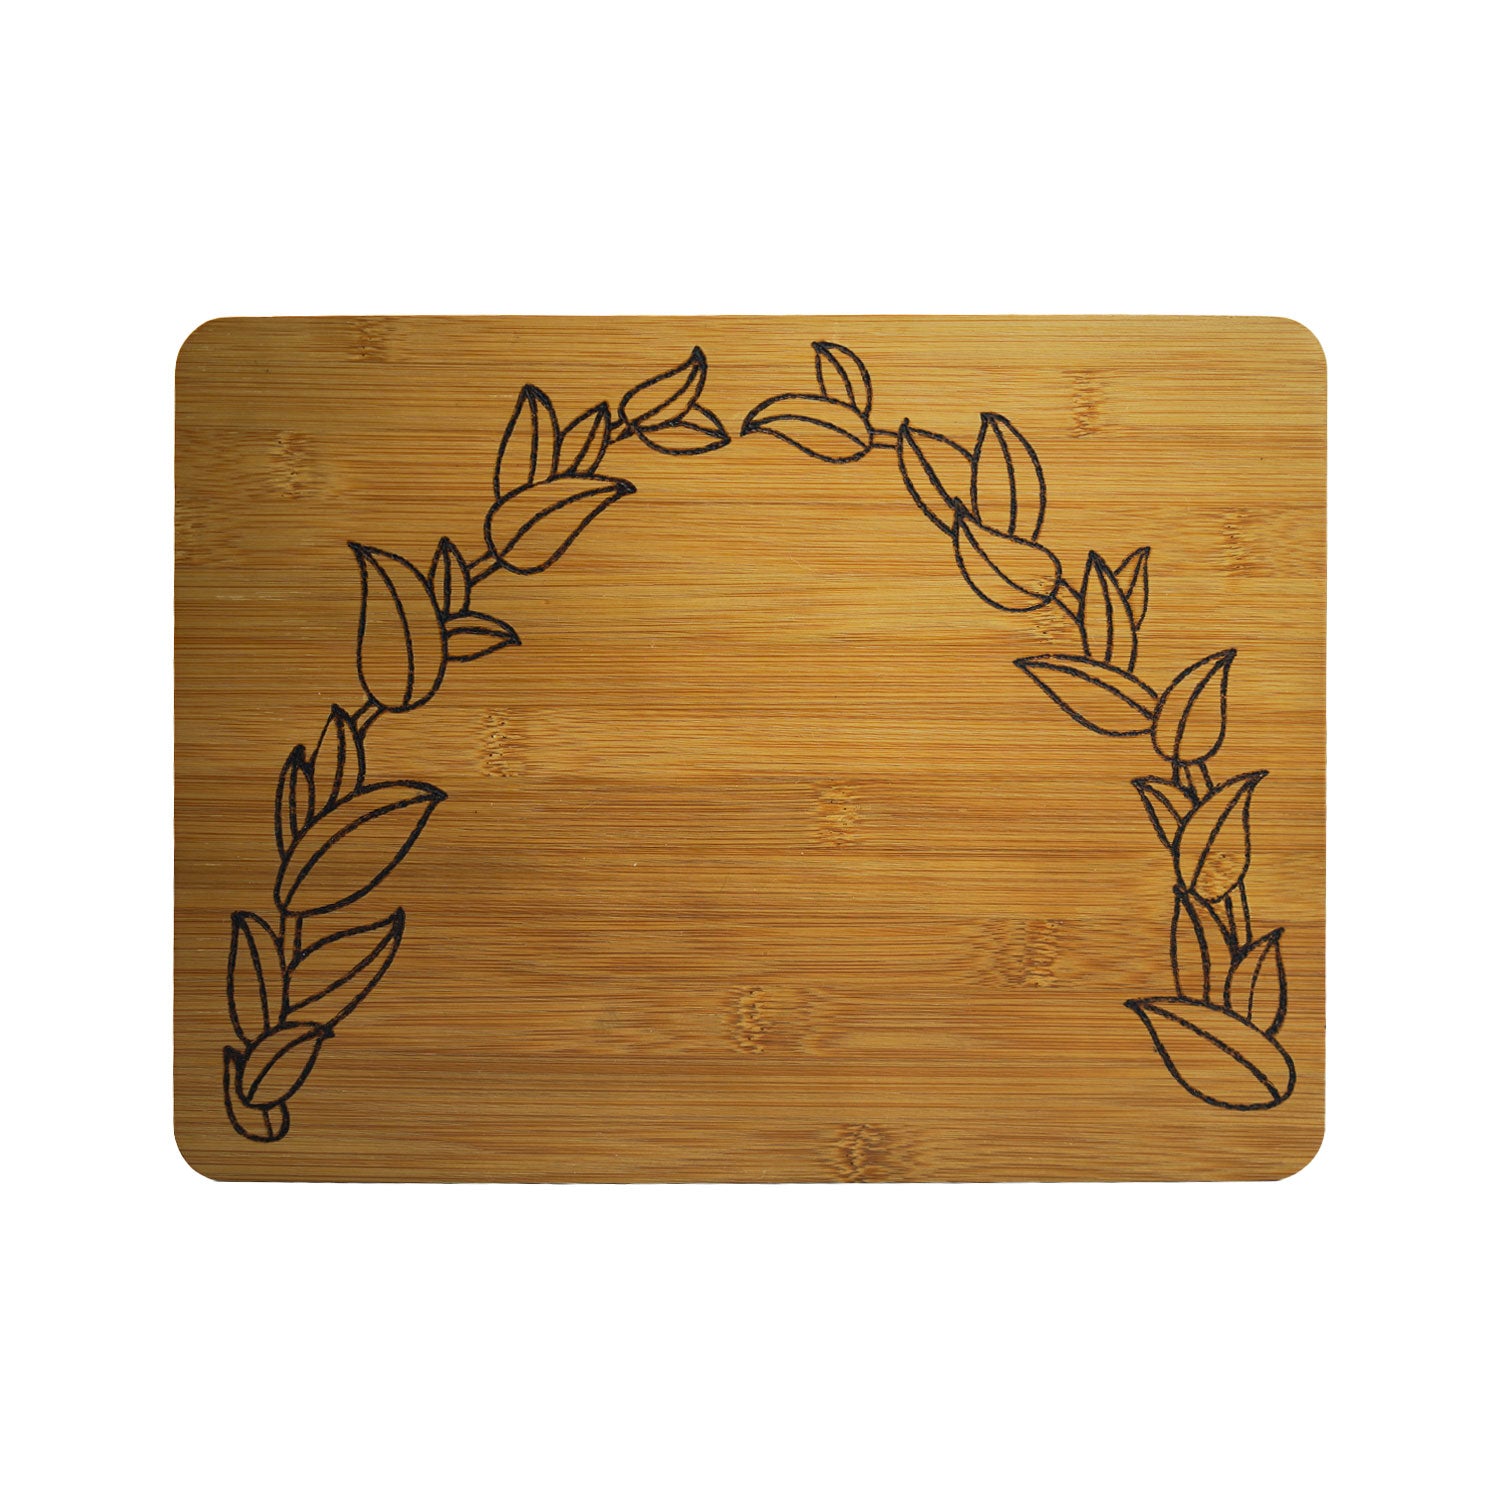 Maile Lei Arch Custom Etched Bamboo Wood Cutting Board